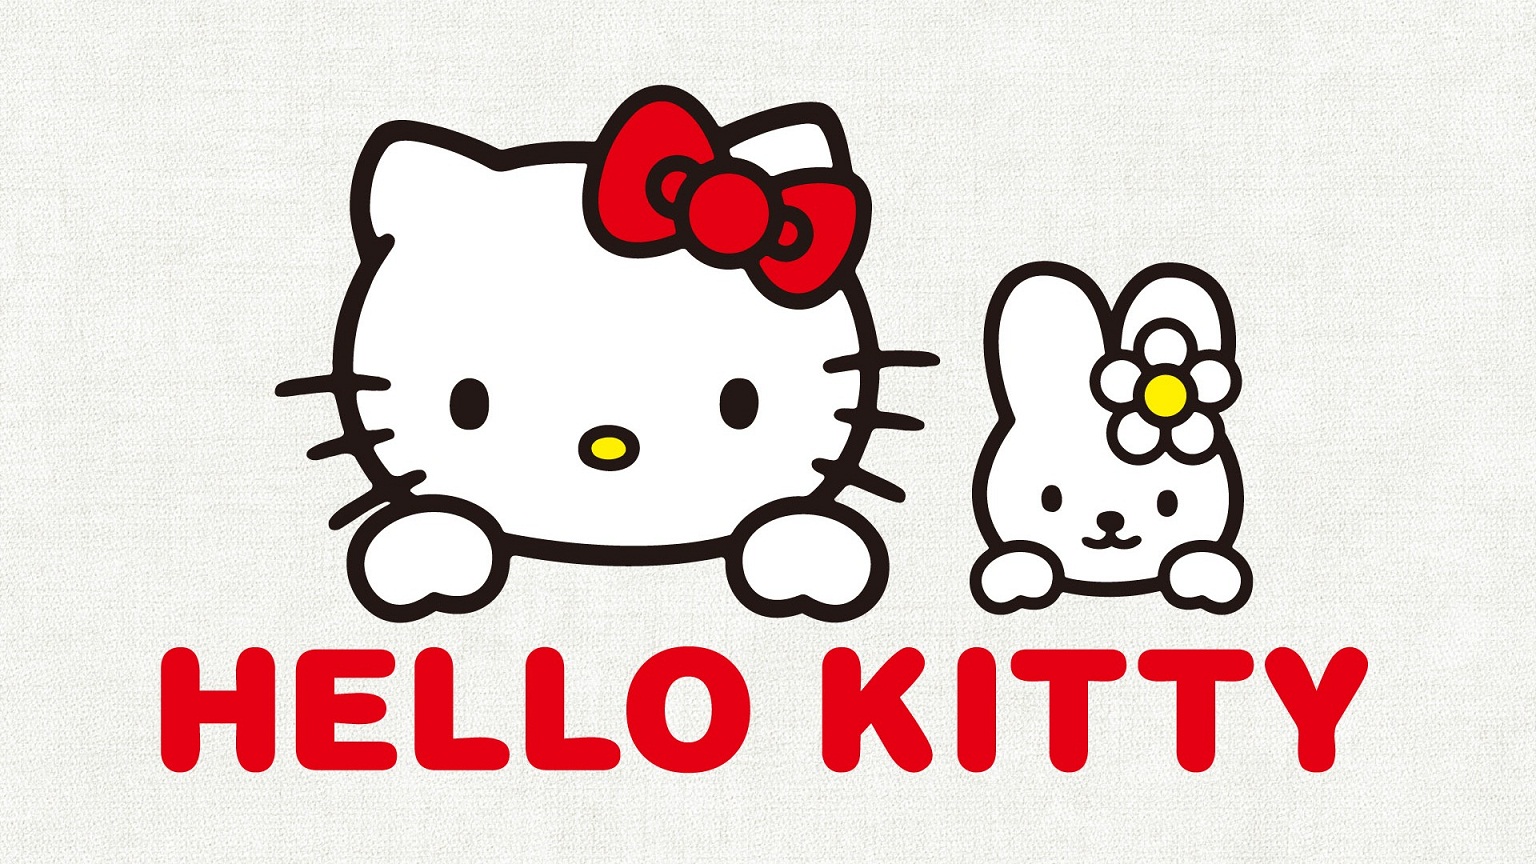  Be Positive   HELLO KITTY WALLPAPERS